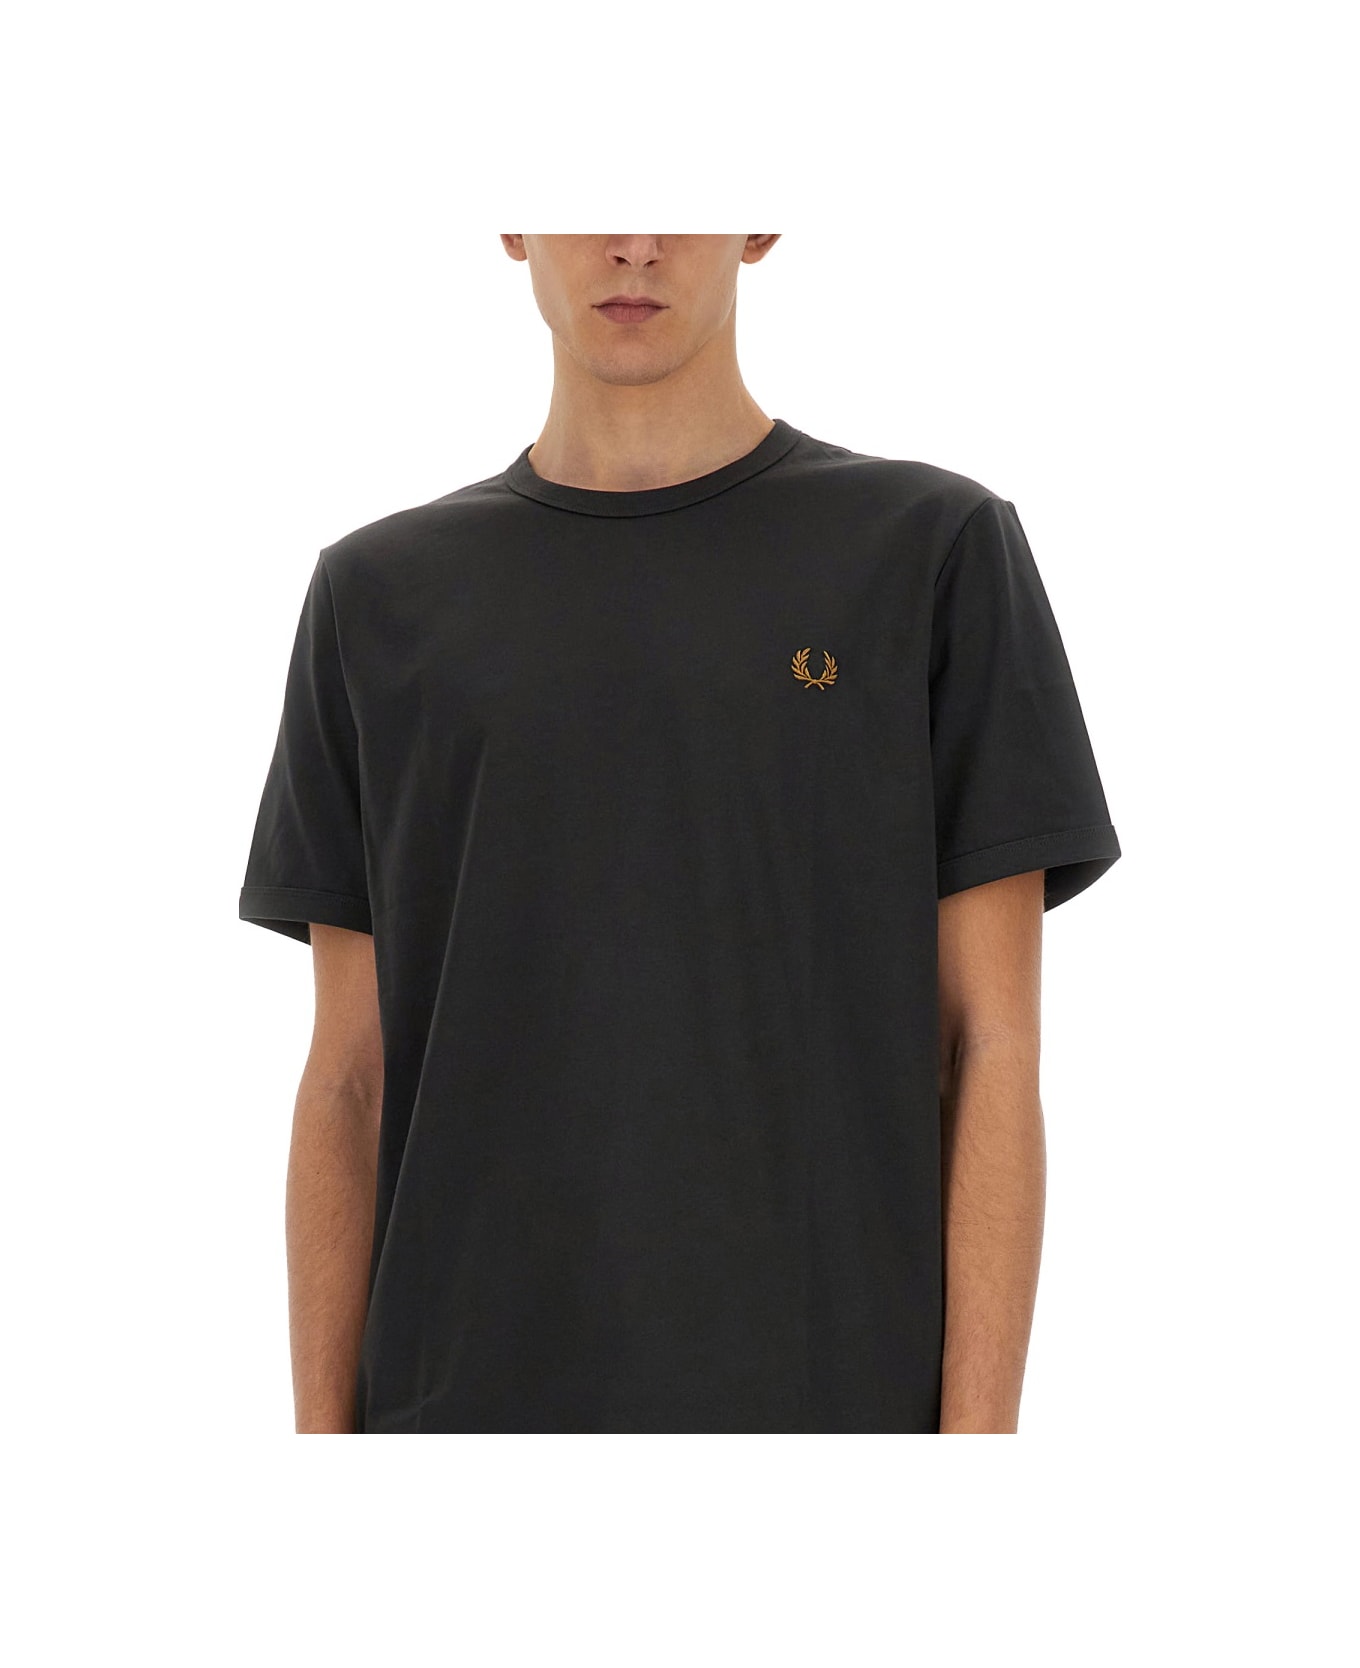 Fred Perry T-shirt With Logo - GREY